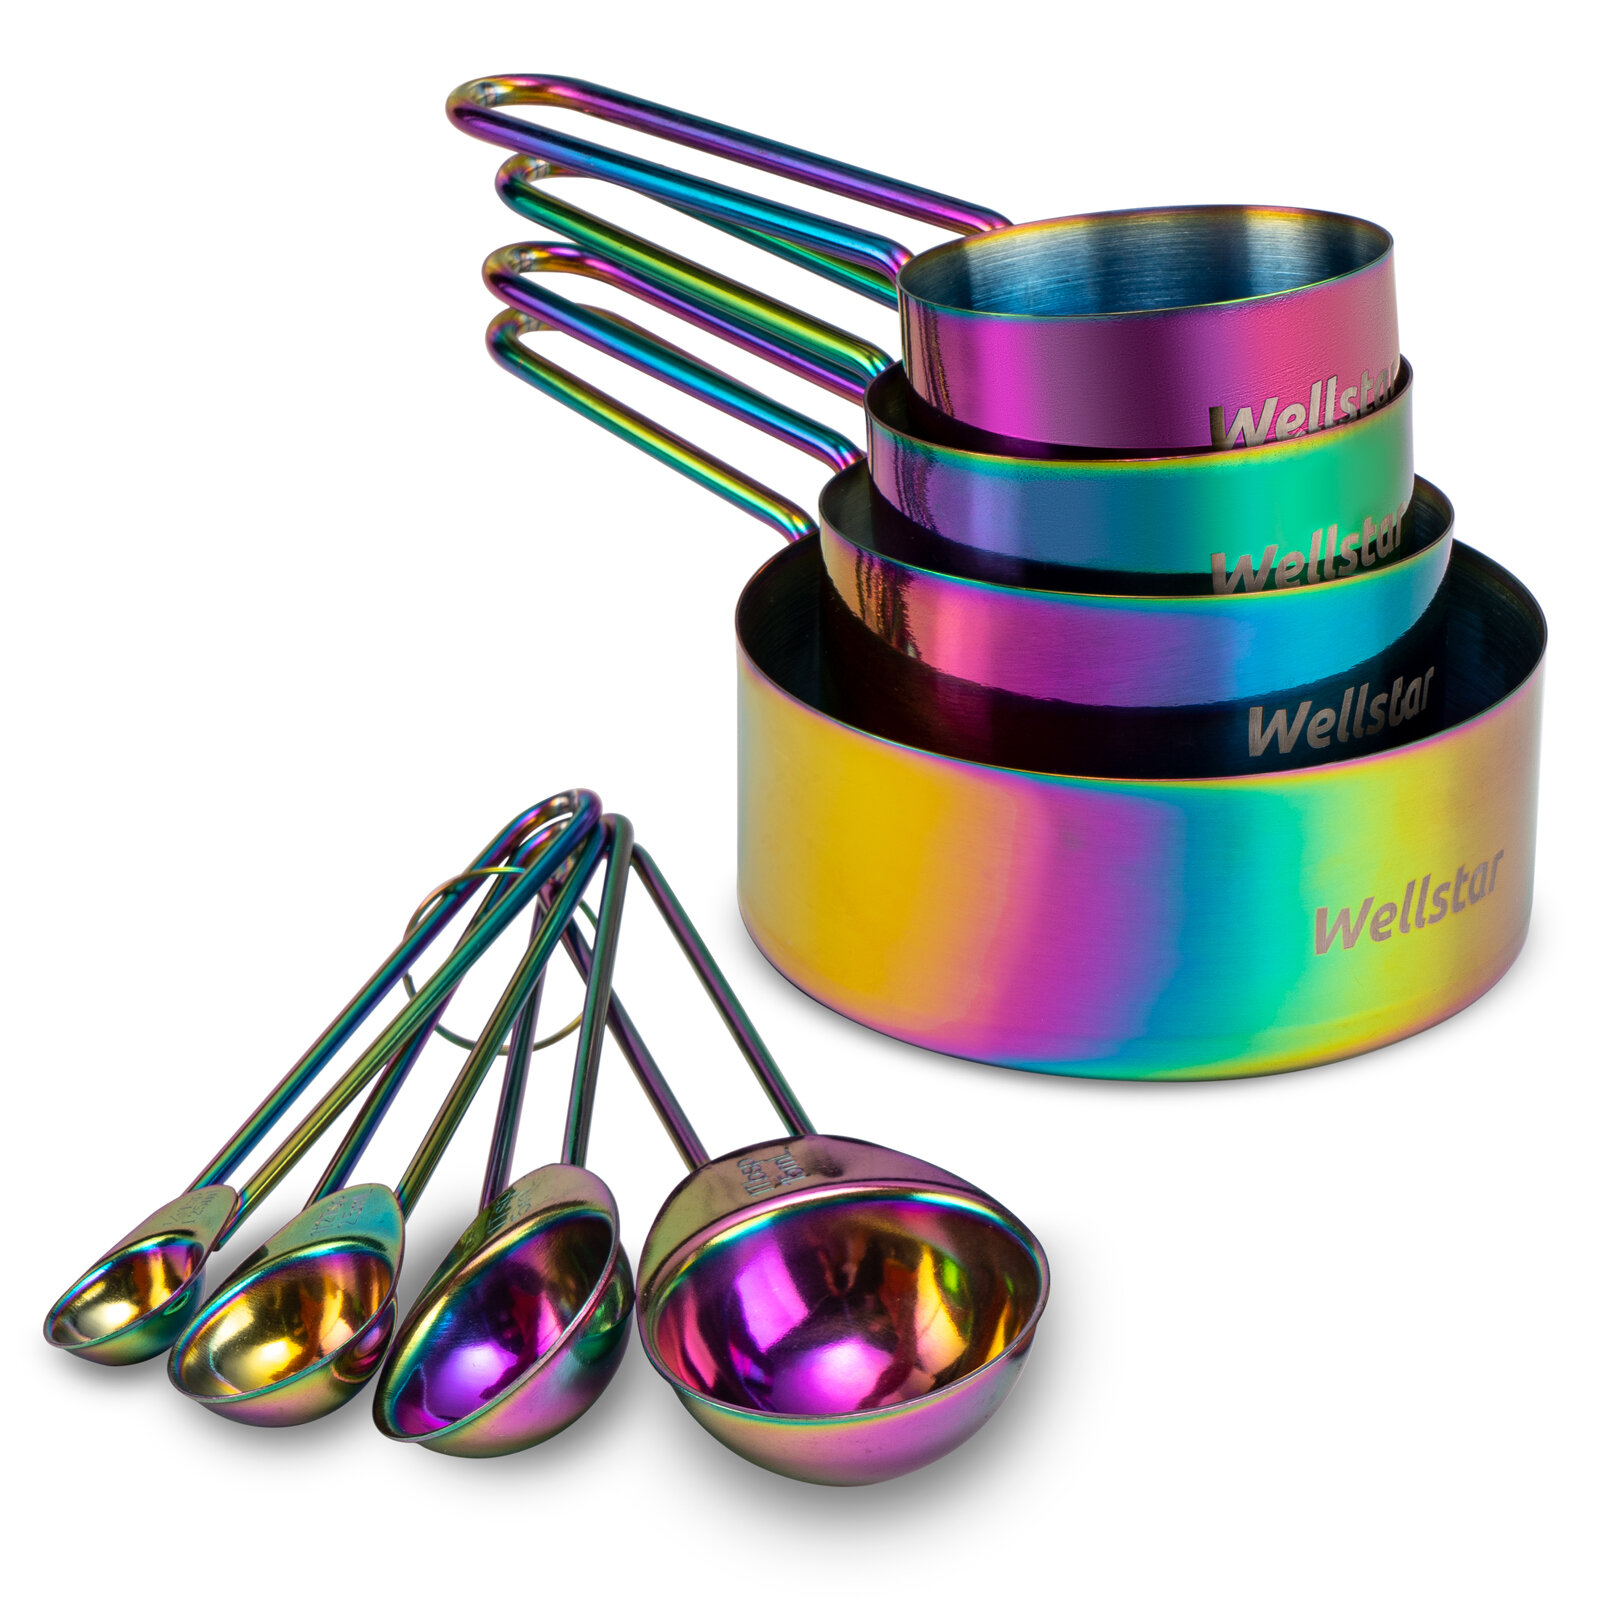 Rainbow Measuring Cups and Spoons Set, Stainless Steel 10 Piece Set,  Stackable 5 Measuring Cups and 5 Measuring Spoons with 2 Rings, Titanium  Colorful